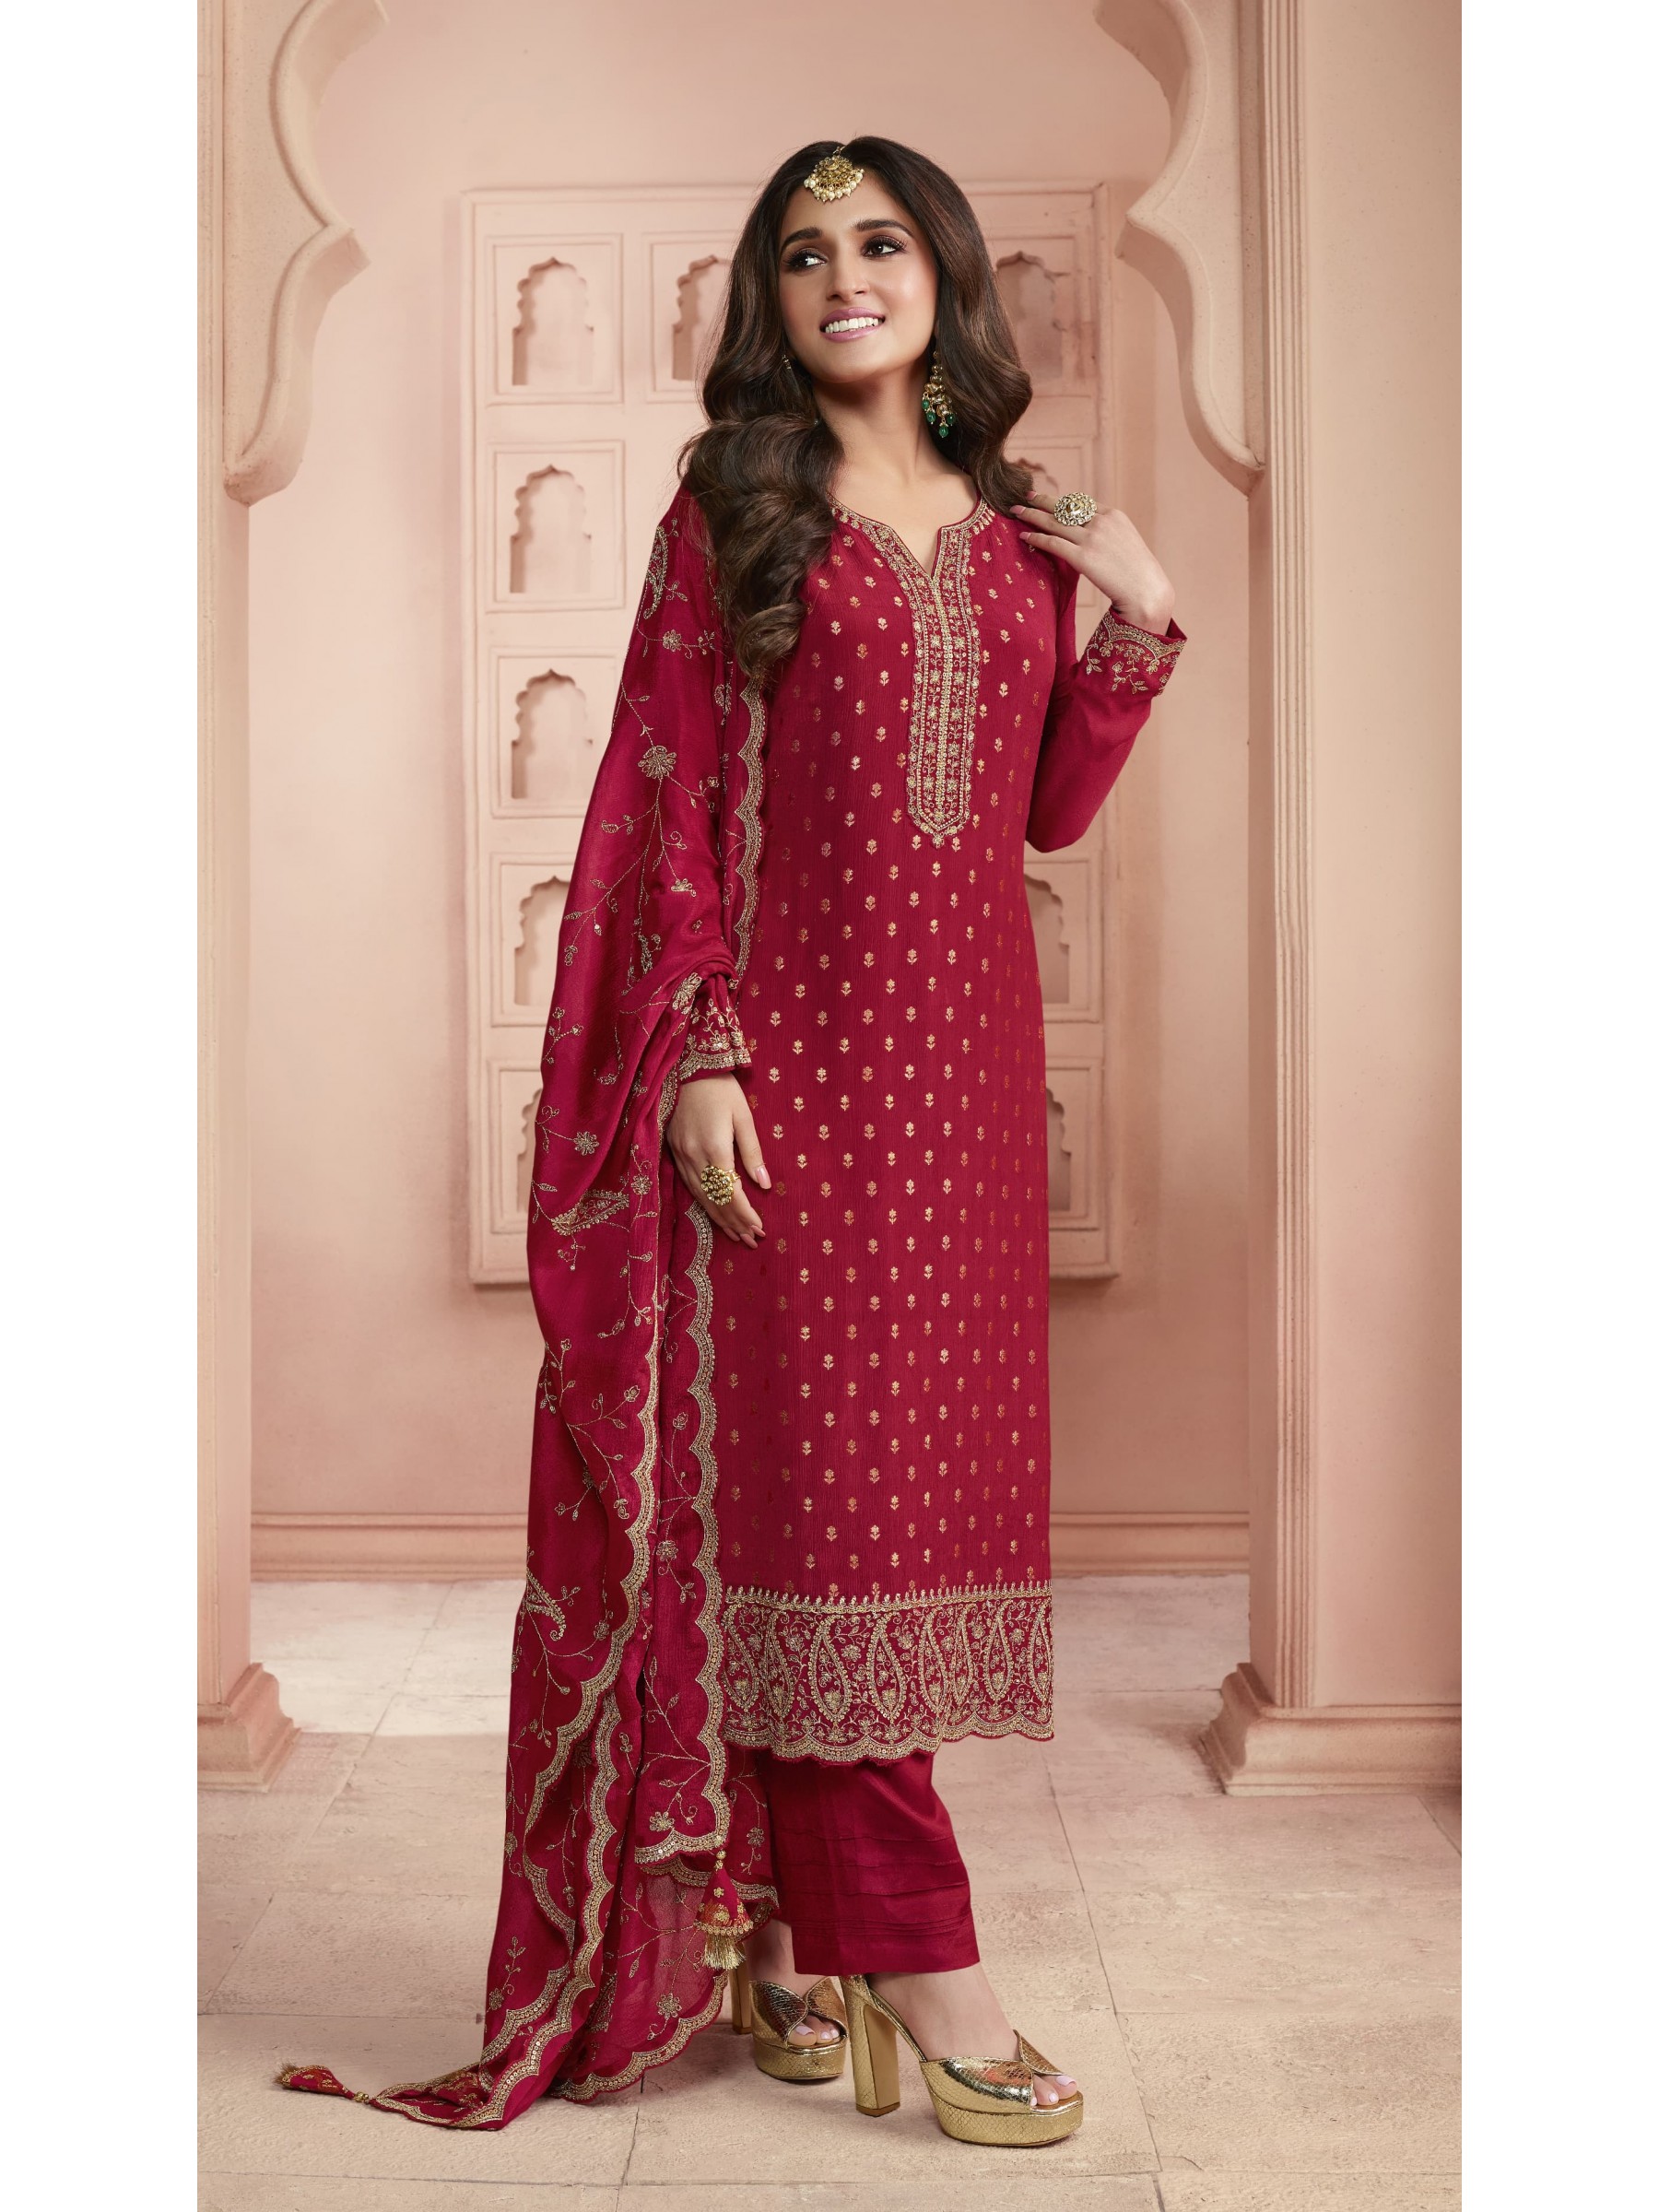 Pure Dola Jacquard Silk Party Wear Suit in Red Color with Embroidery Work